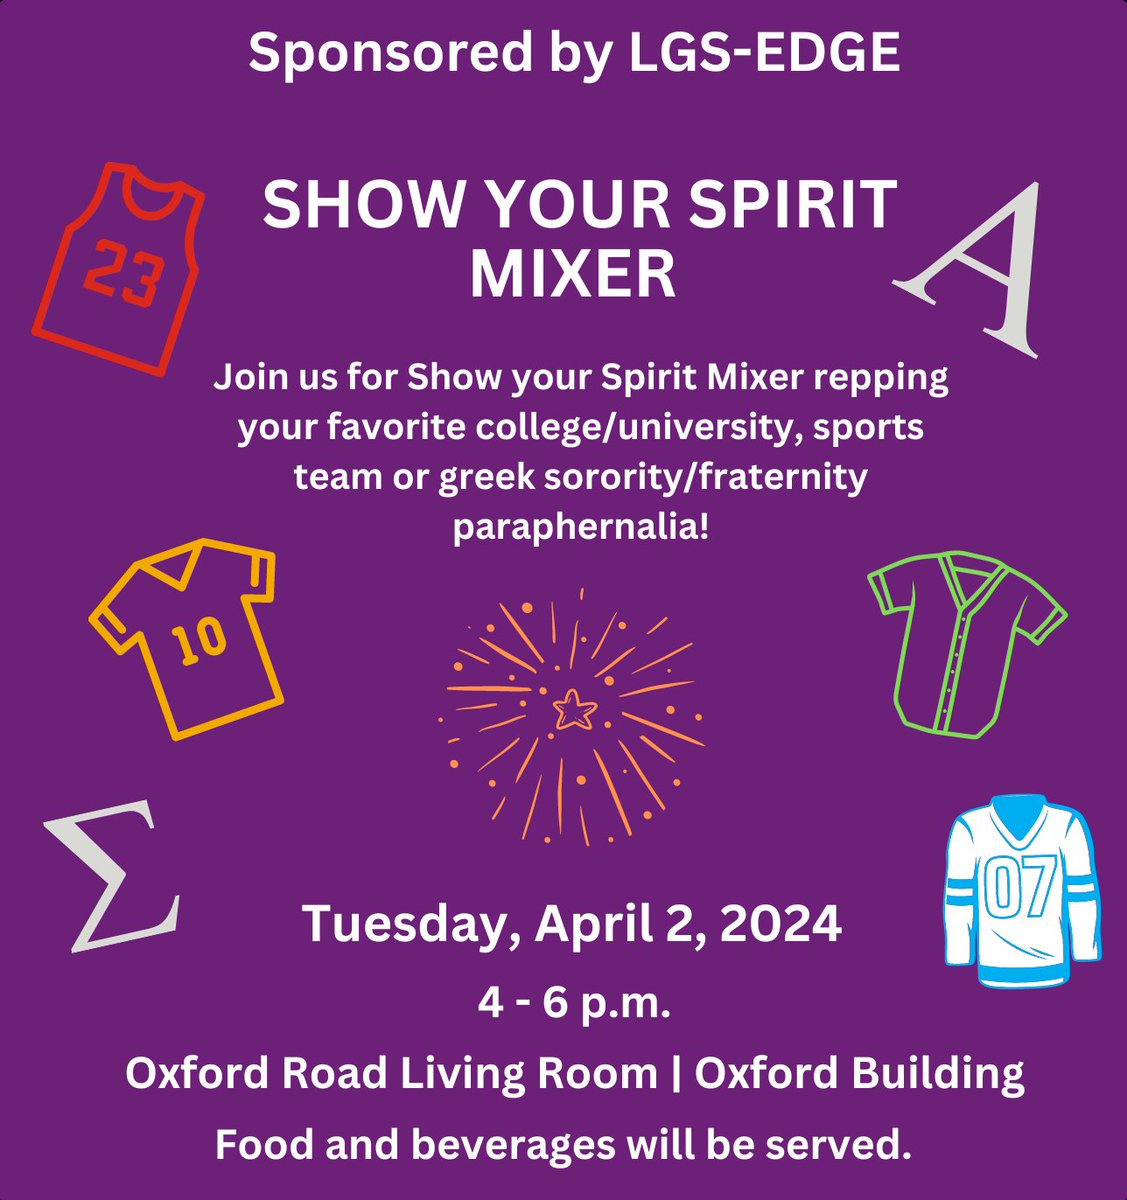 Happening in 1 hour! From 4 - 6p in the Oxford Living Room (across from the bookstore), come and enjoy some mixing and mingling at the Show Your Spirit Mixer. Wear your favorite sports, fraternity/sorority, or university paraphernalia -- or come as you are.